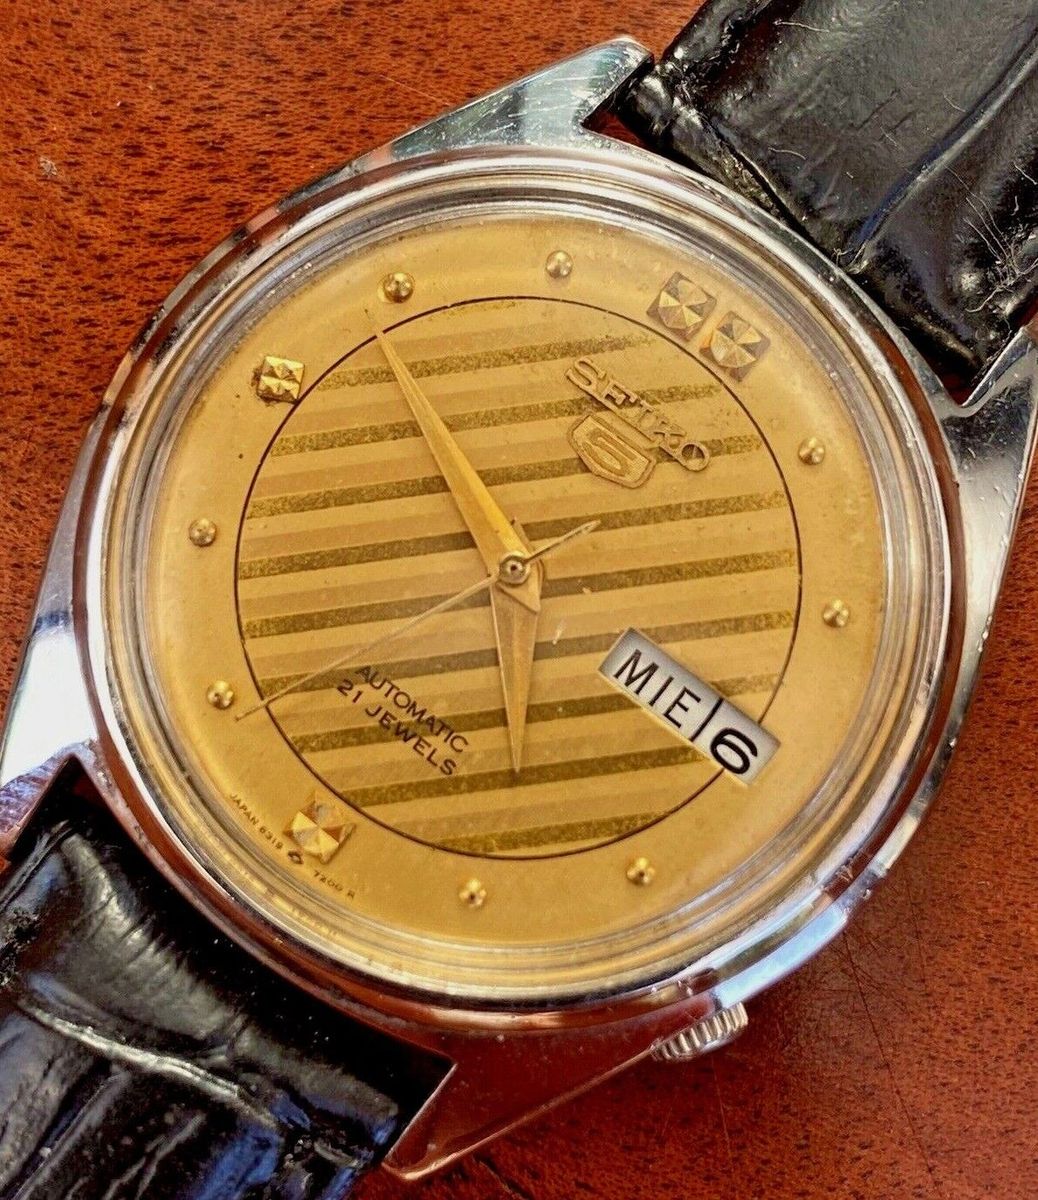 SEIKO 5 AUTOMATIC GENT'S FROM 1988. SUPERB DIAL, GOOD CONDITION, CALIBER  6309.